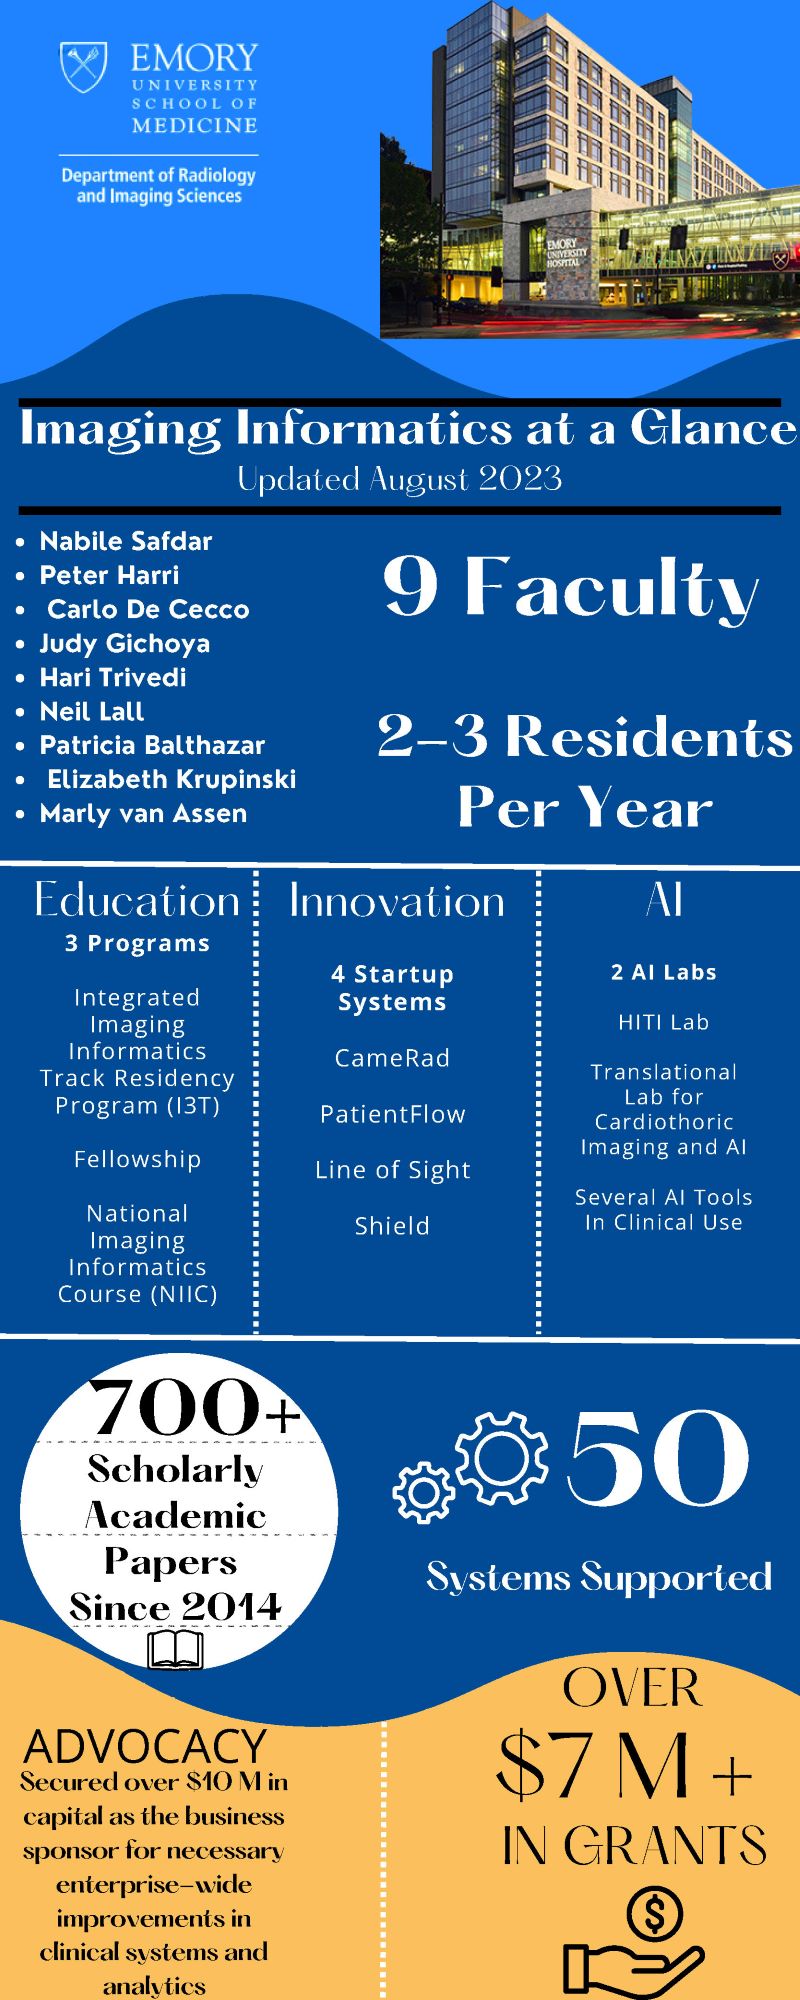 infographic showing tall hospital building and numbers and stats about informatics